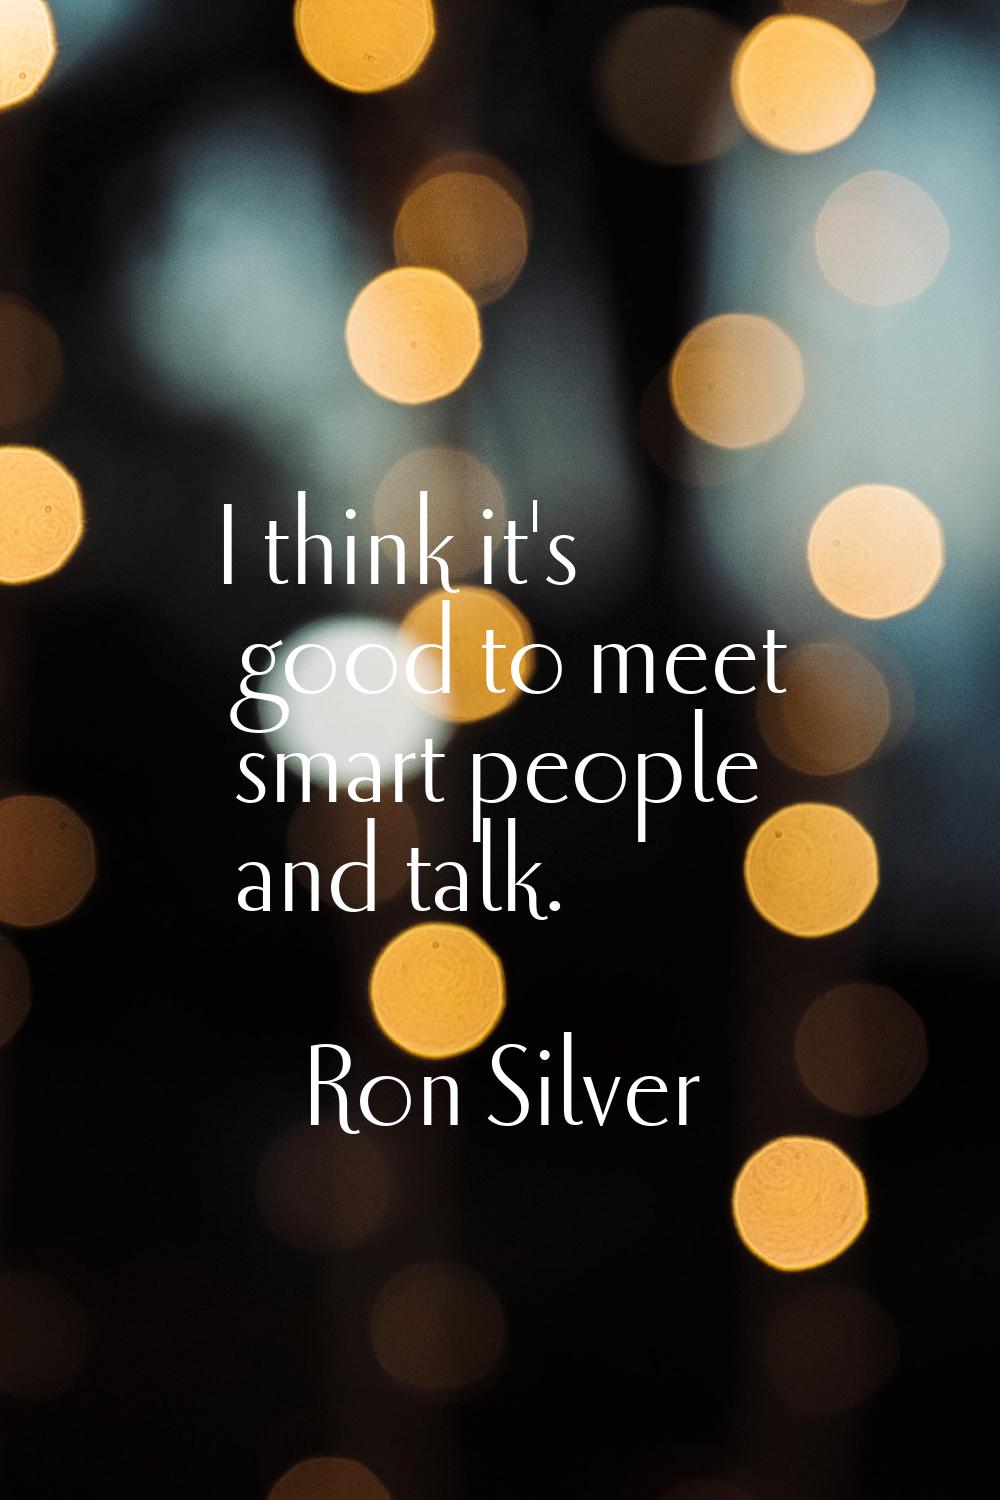 I think it's good to meet smart people and talk.